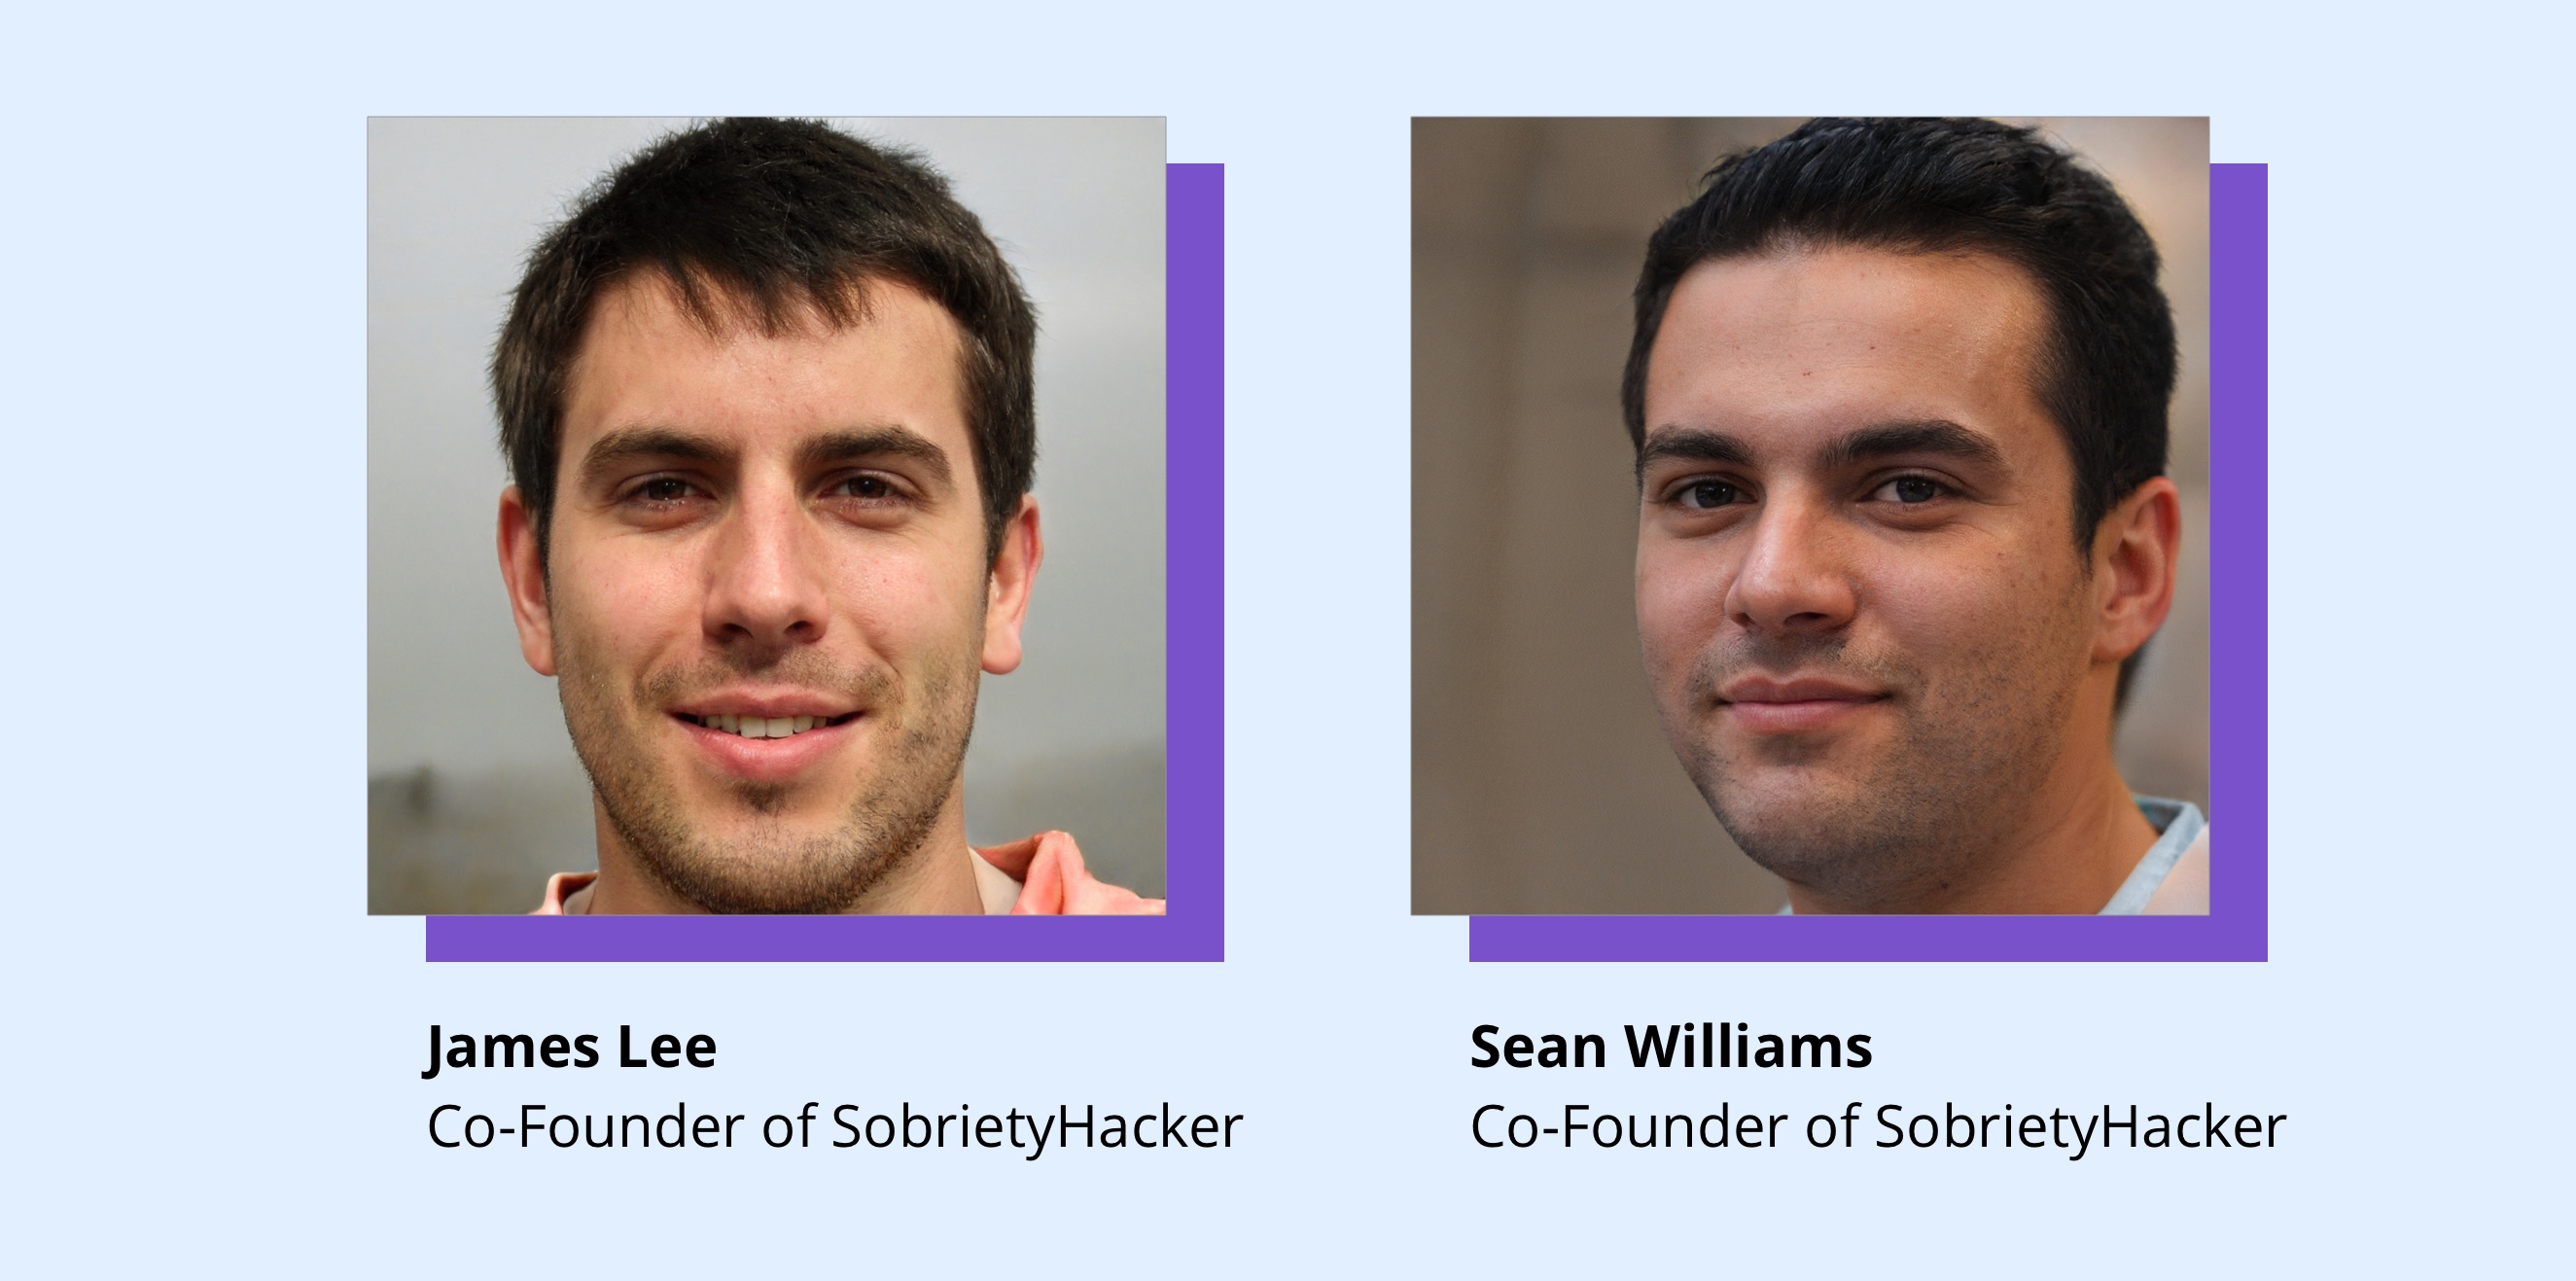 Sean and James, founders of SobrietyHacker.